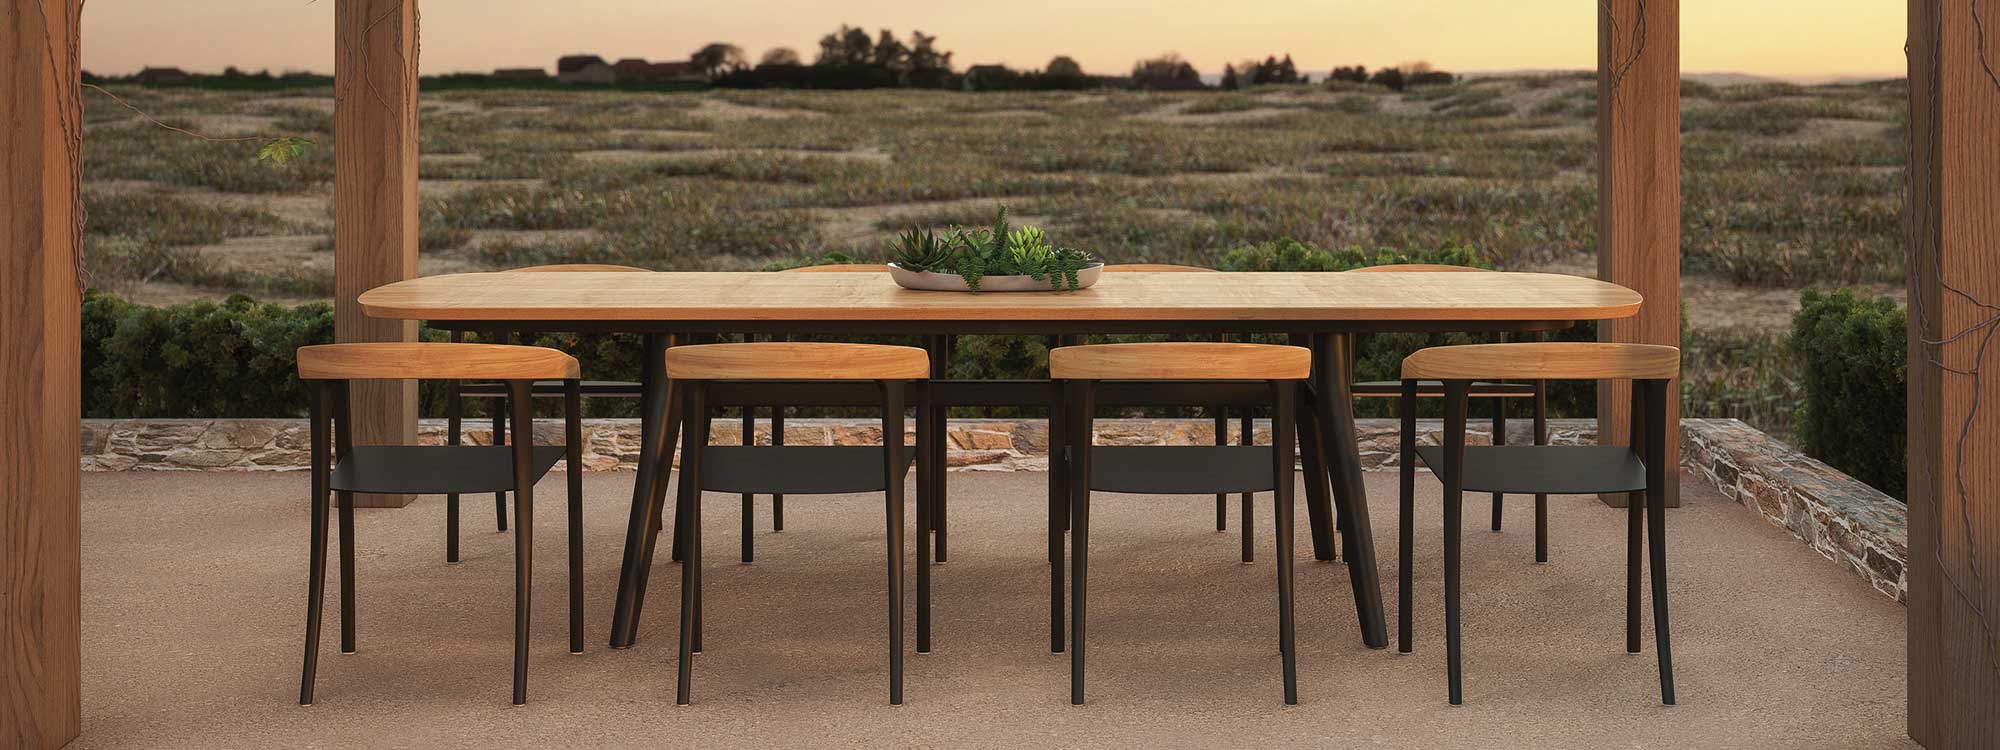 Image of Jive Zidiz outdoor dining furniture by Royal Botania with arid planting in the background